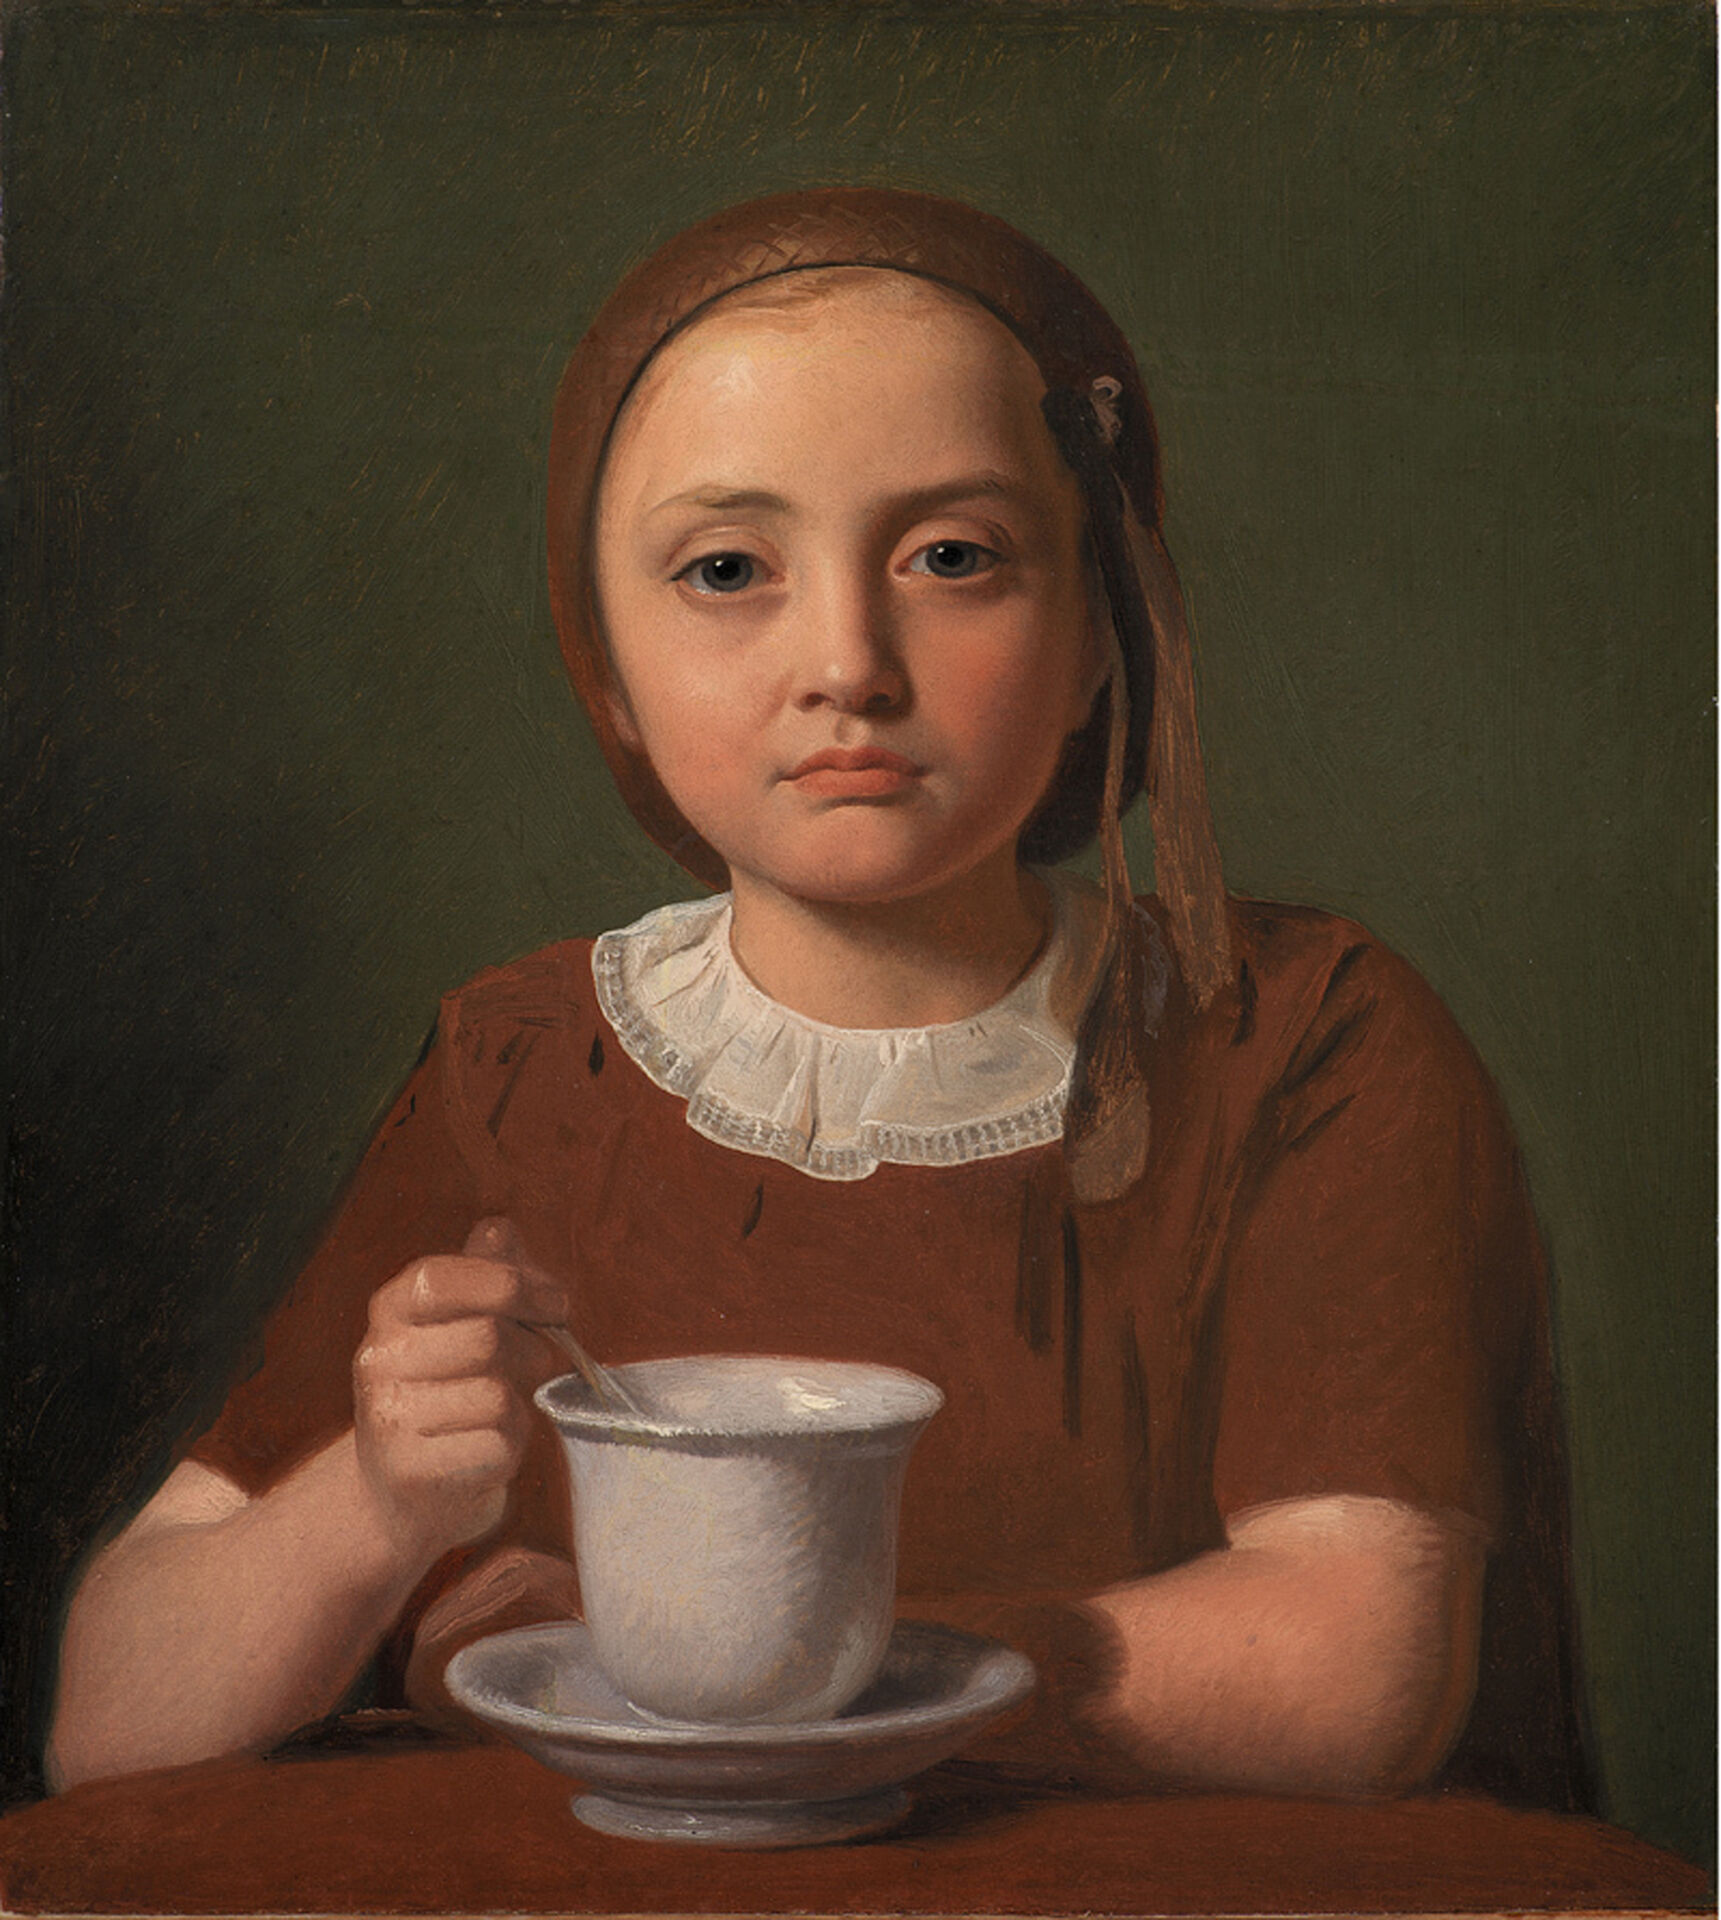 Constantin Hansen, Portrait of a Little Girl, Elise Købke, with a Cup in front of her, 1850. Oil on paper laid down on canvas. The National Gallery of Denmark.